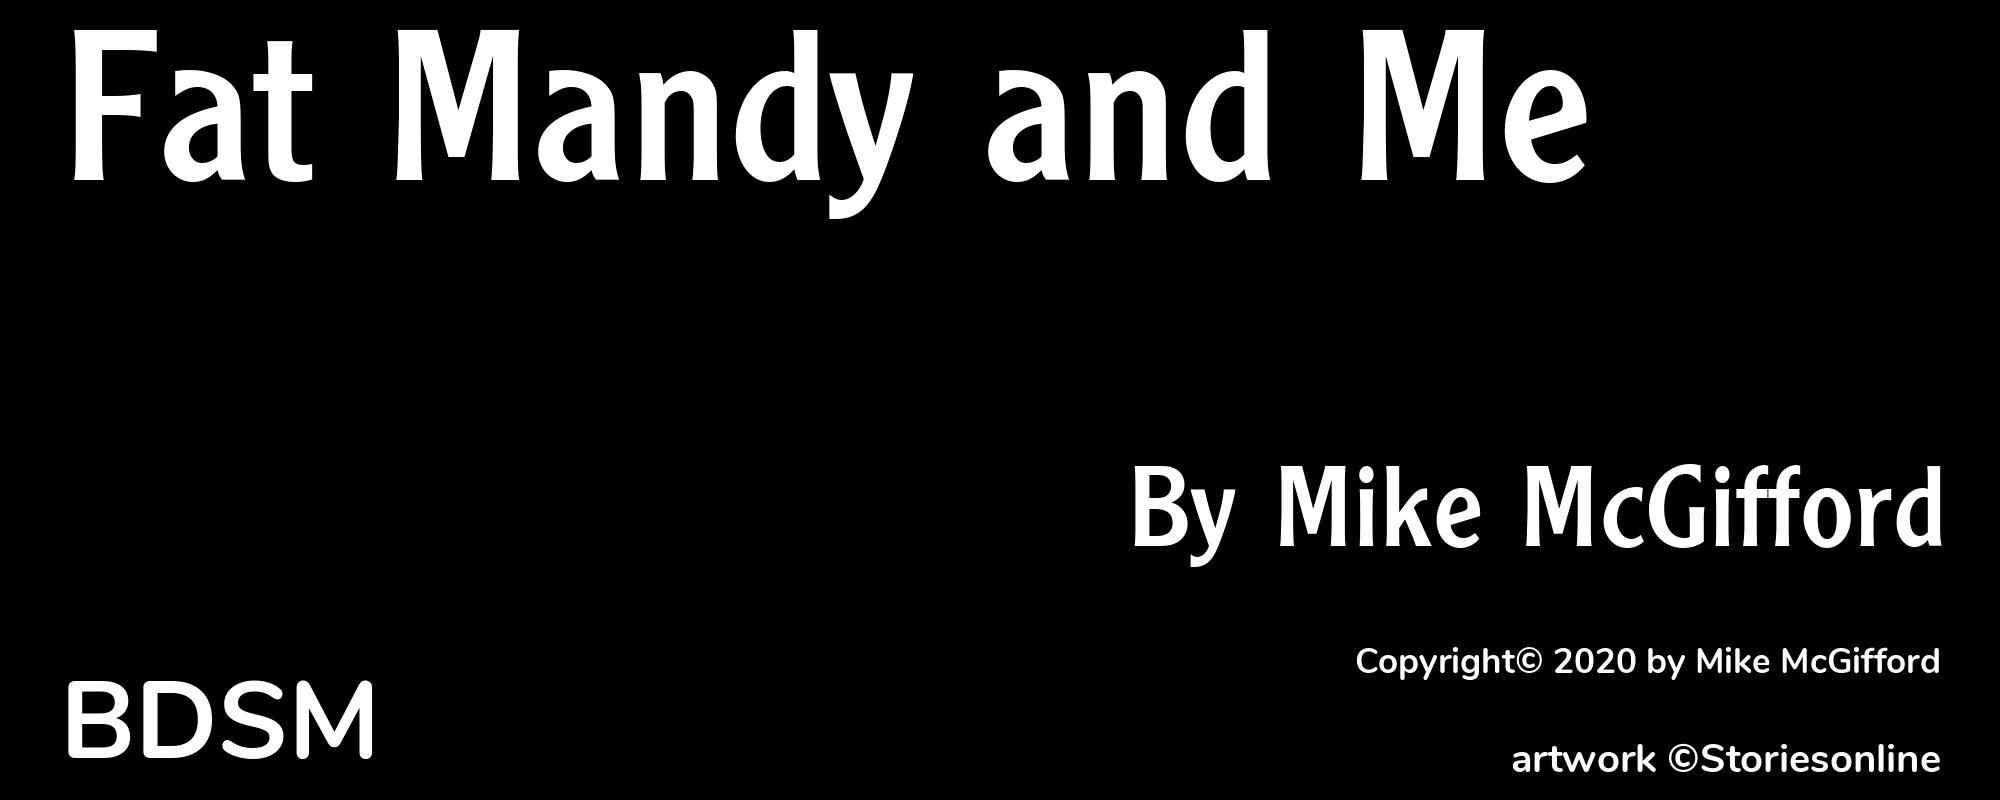 Fat Mandy and Me - Cover